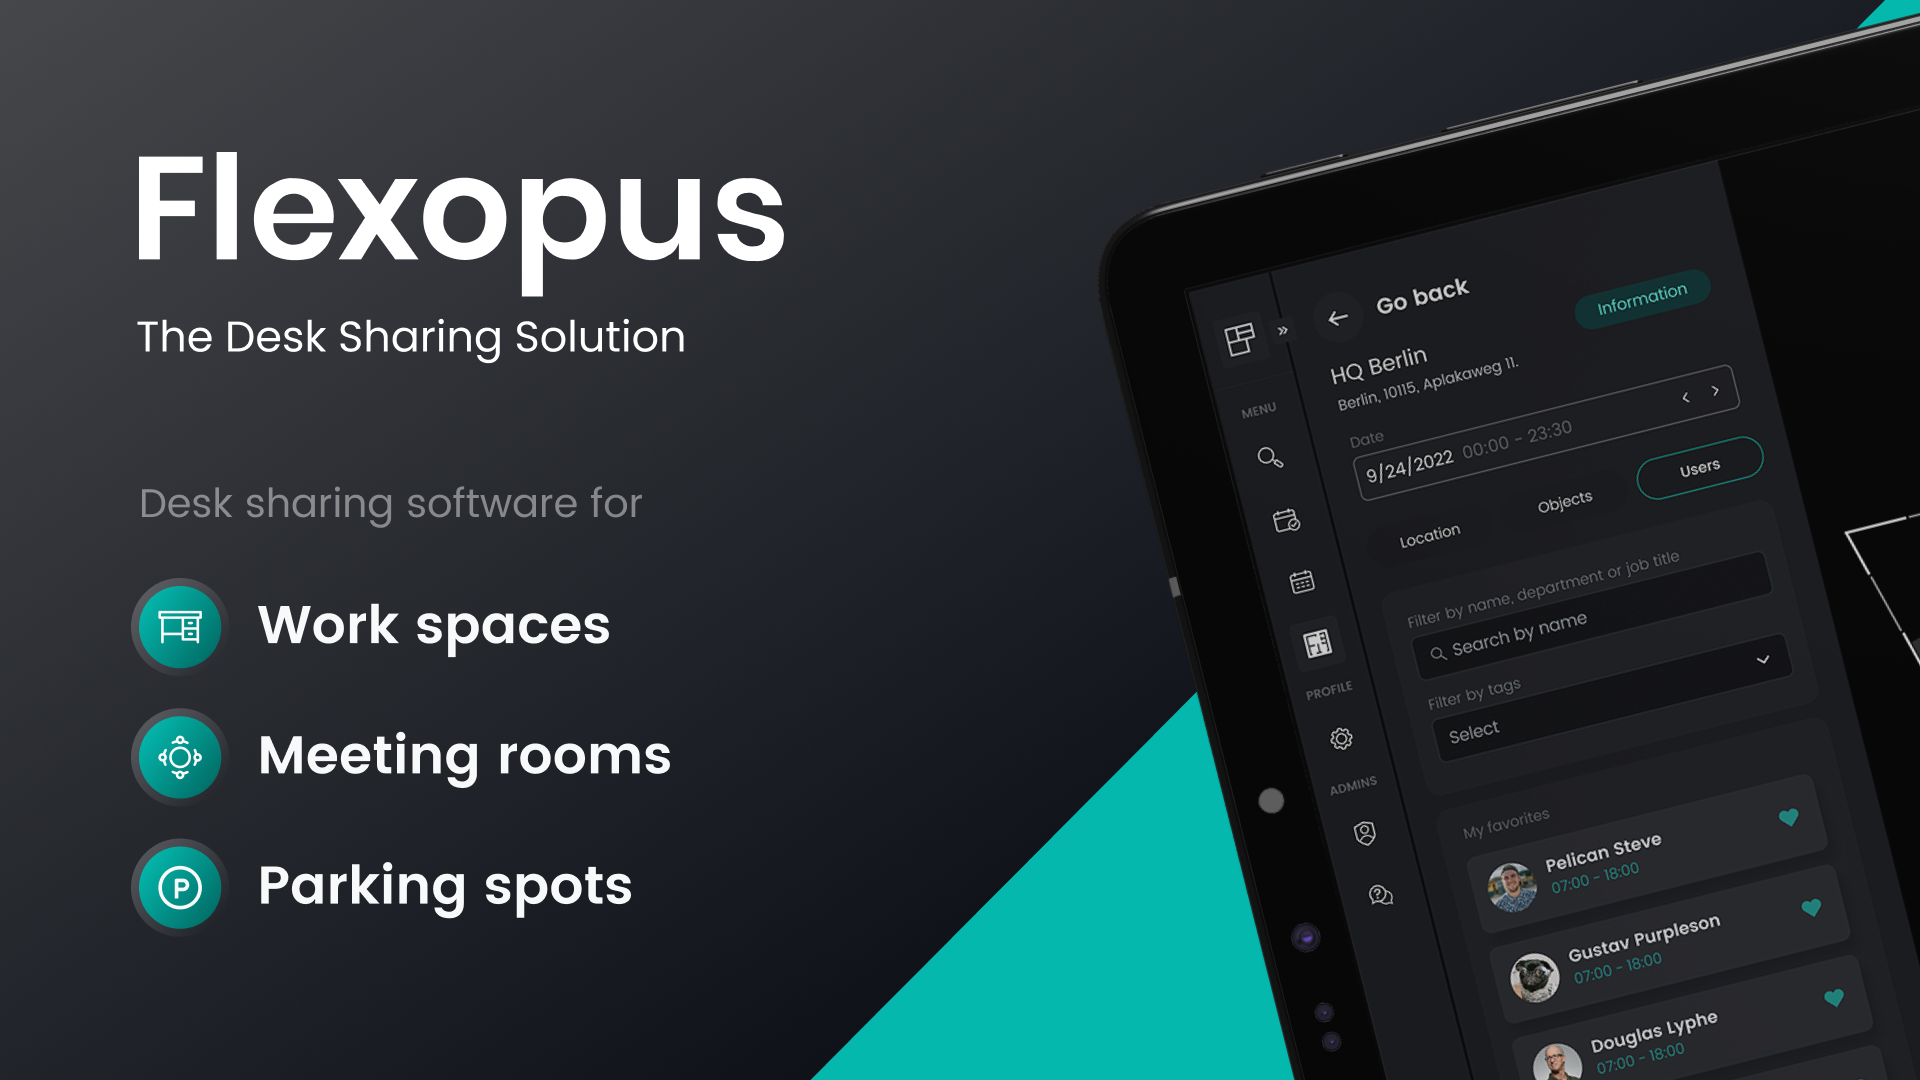 Flexopus - The probably easiest Workplace Management Software to use